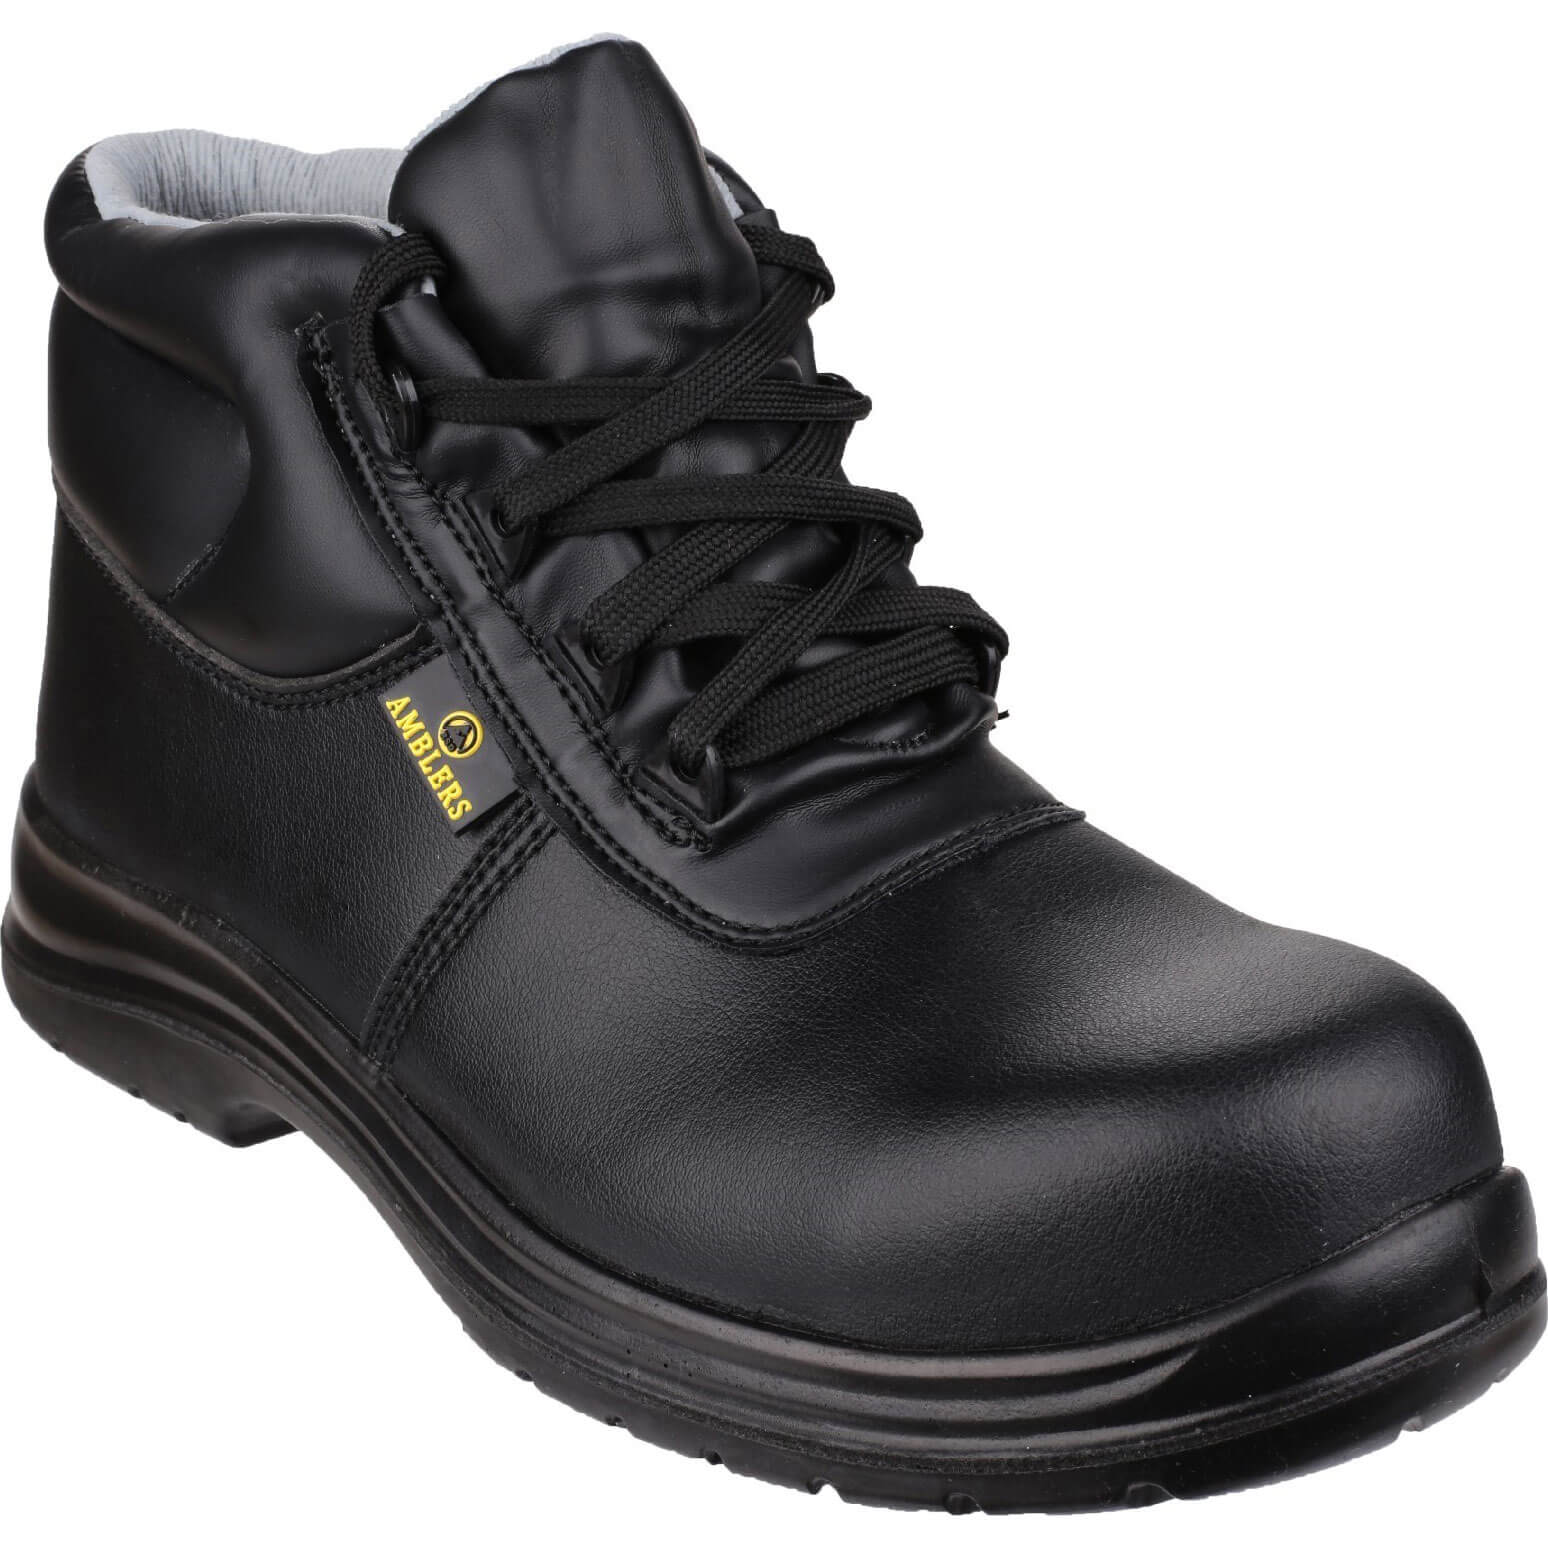 Photo of Amblers Mens Safety Fs663 Metal-free Water-resistant Safety Boots Black Size 3